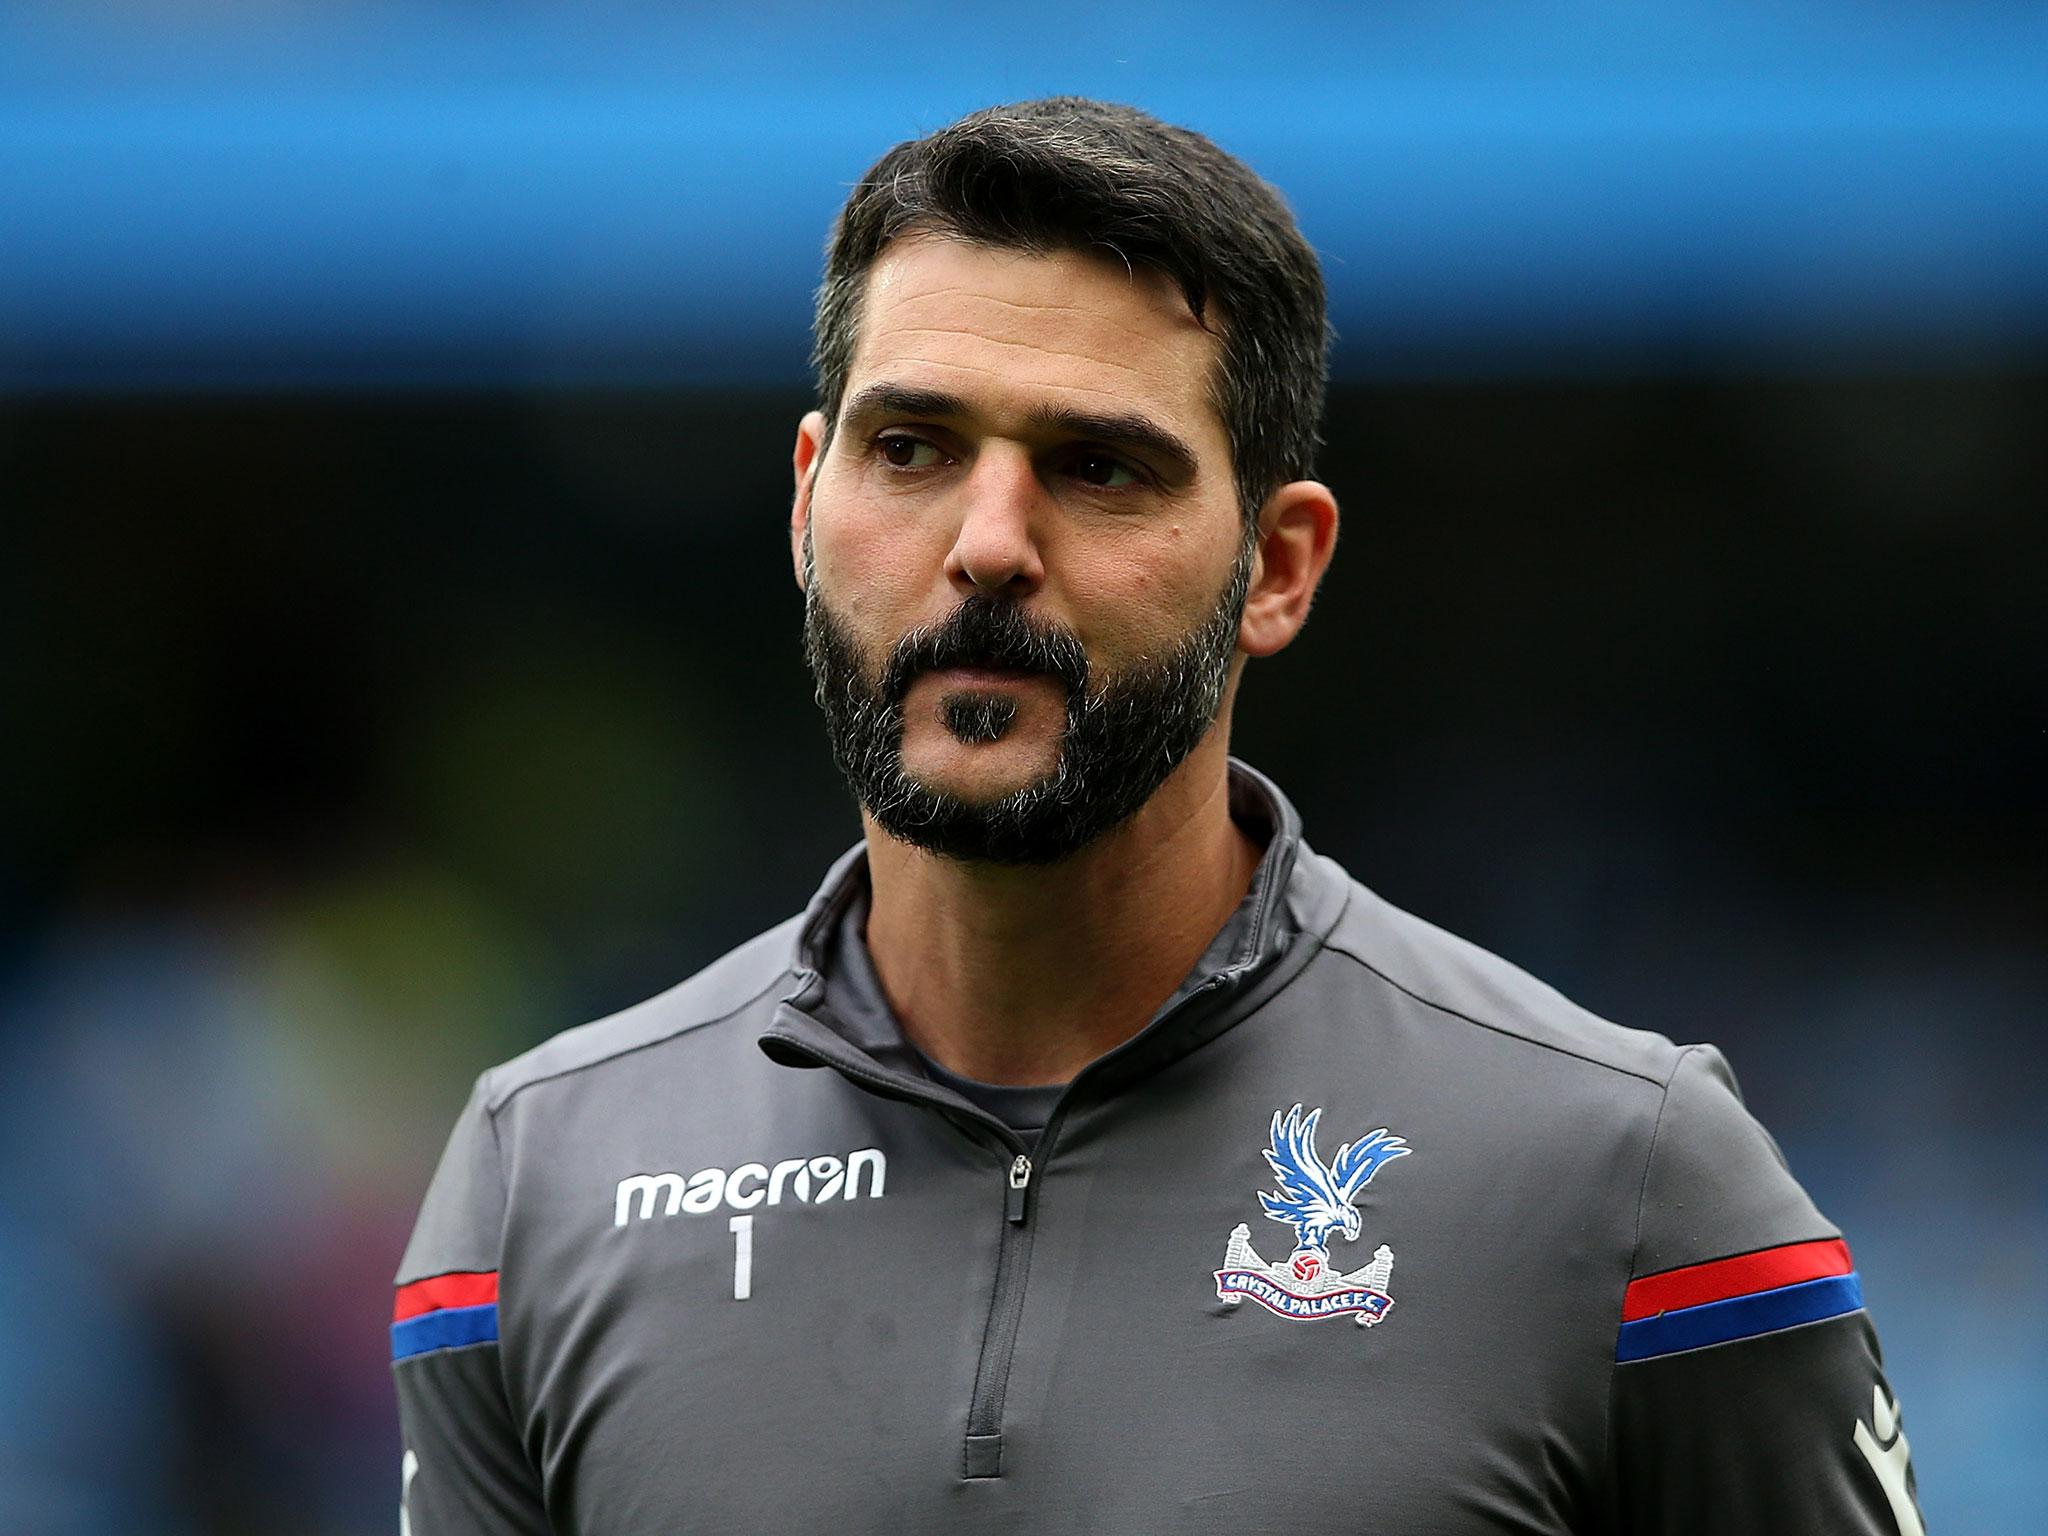 The Argentinean has been at Crystal Palace since 2004